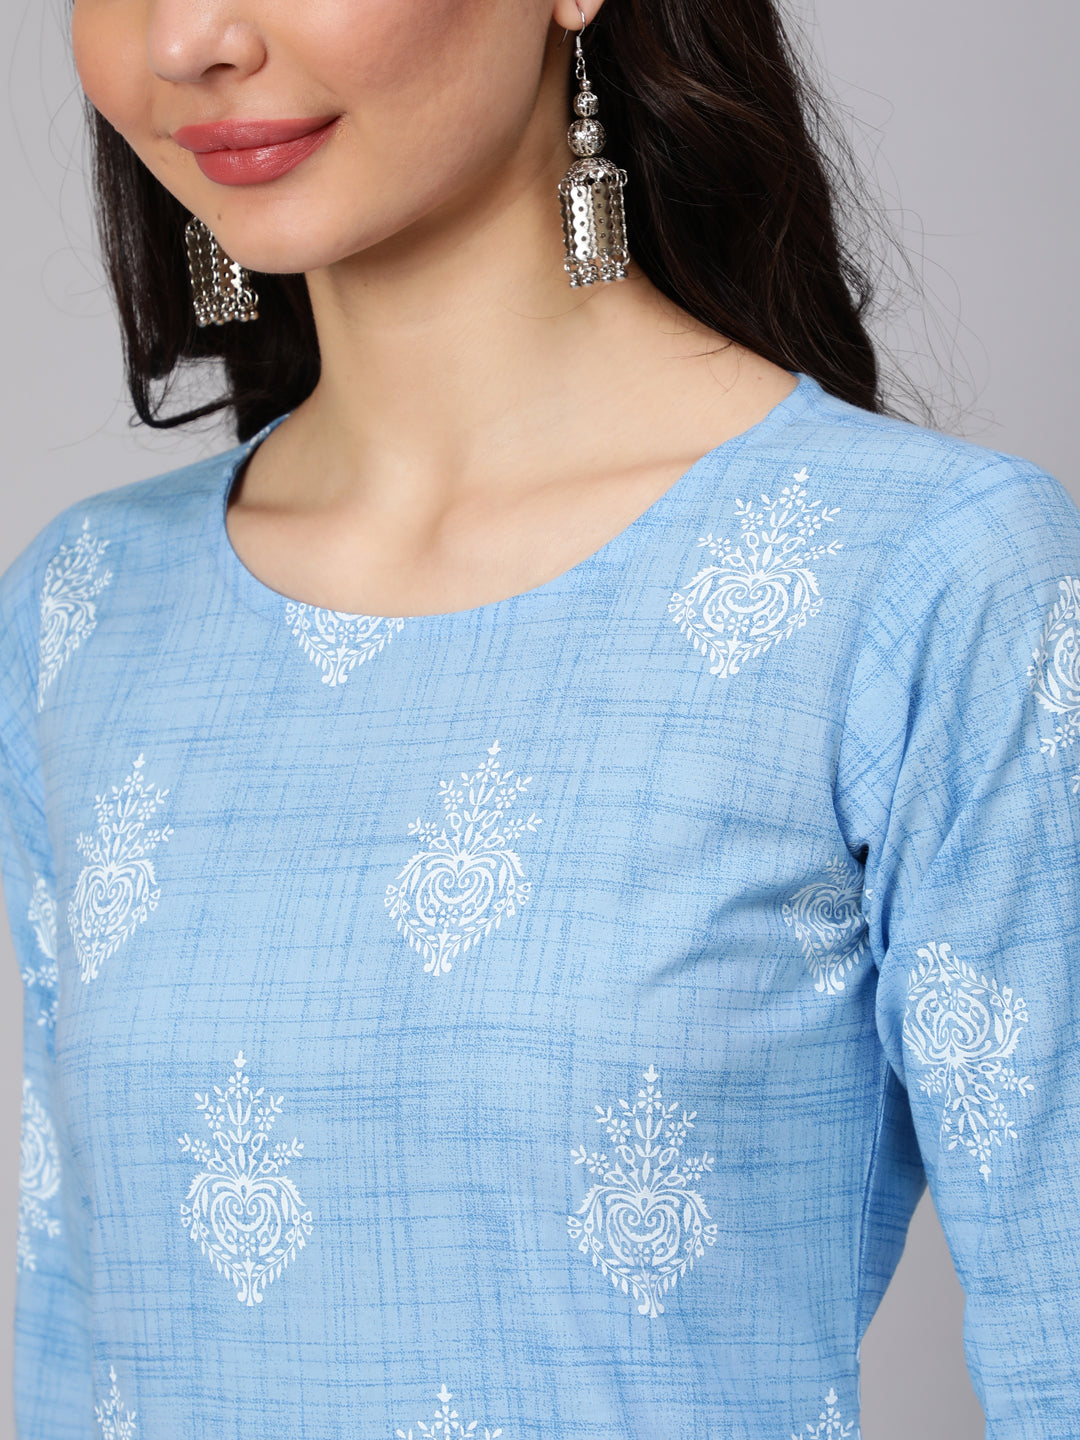 Women's Light Blue Printed Straight Kurta With Trouser And Lace Details - Nayo Clothing